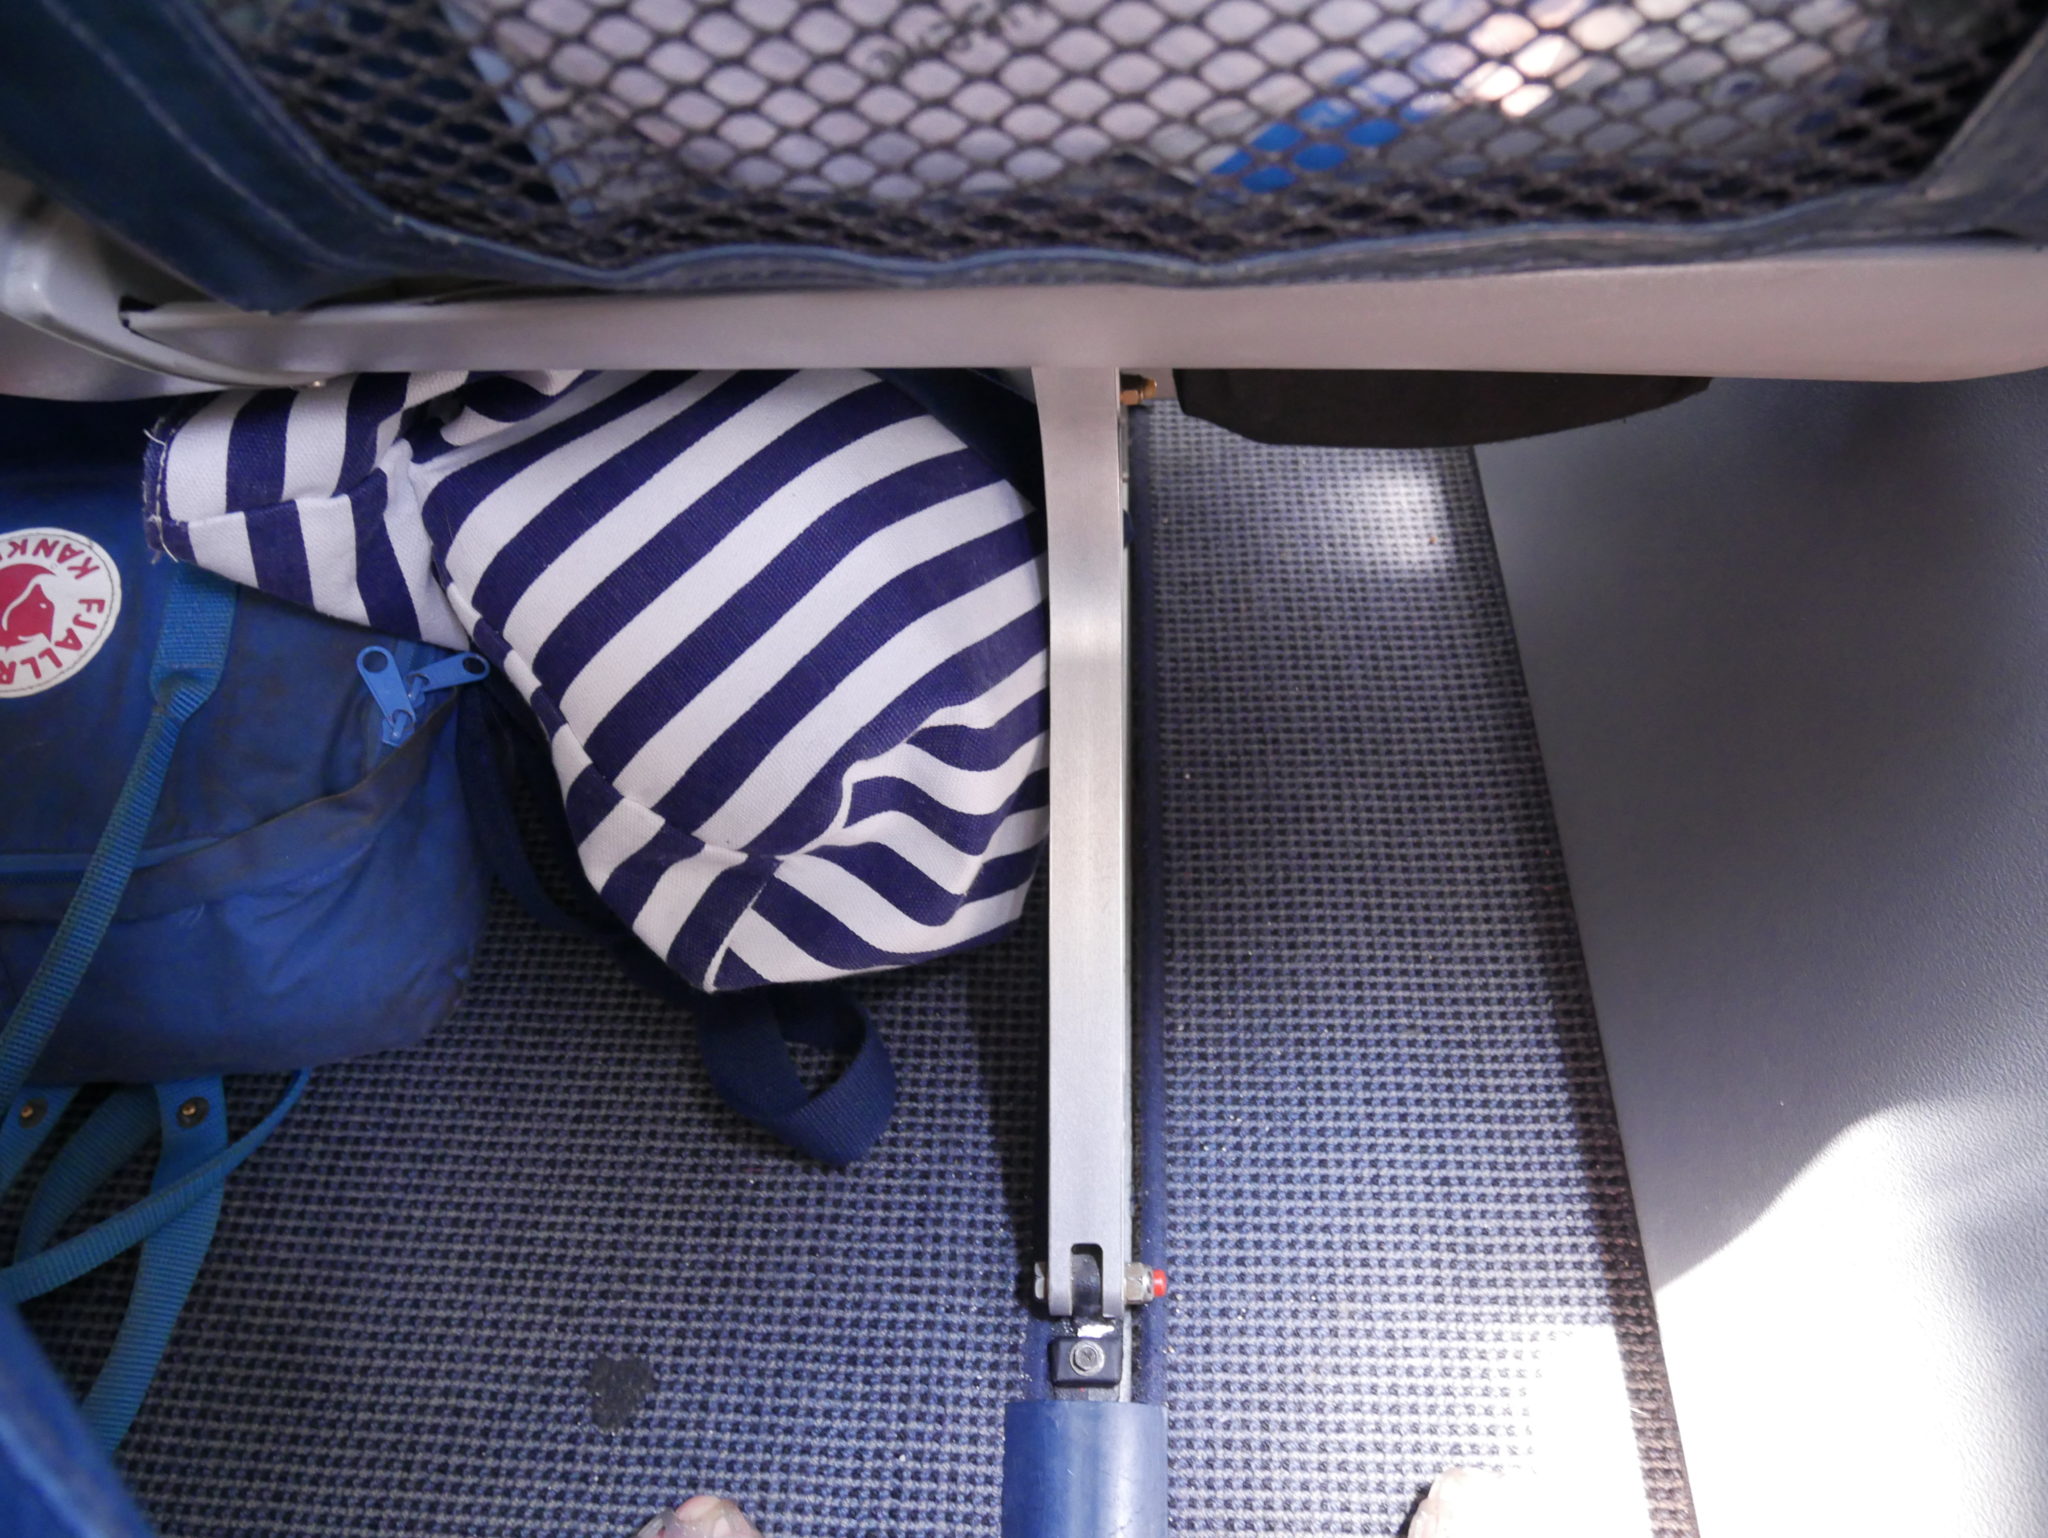 Under the seat of Flyme ATR 72-500 plane